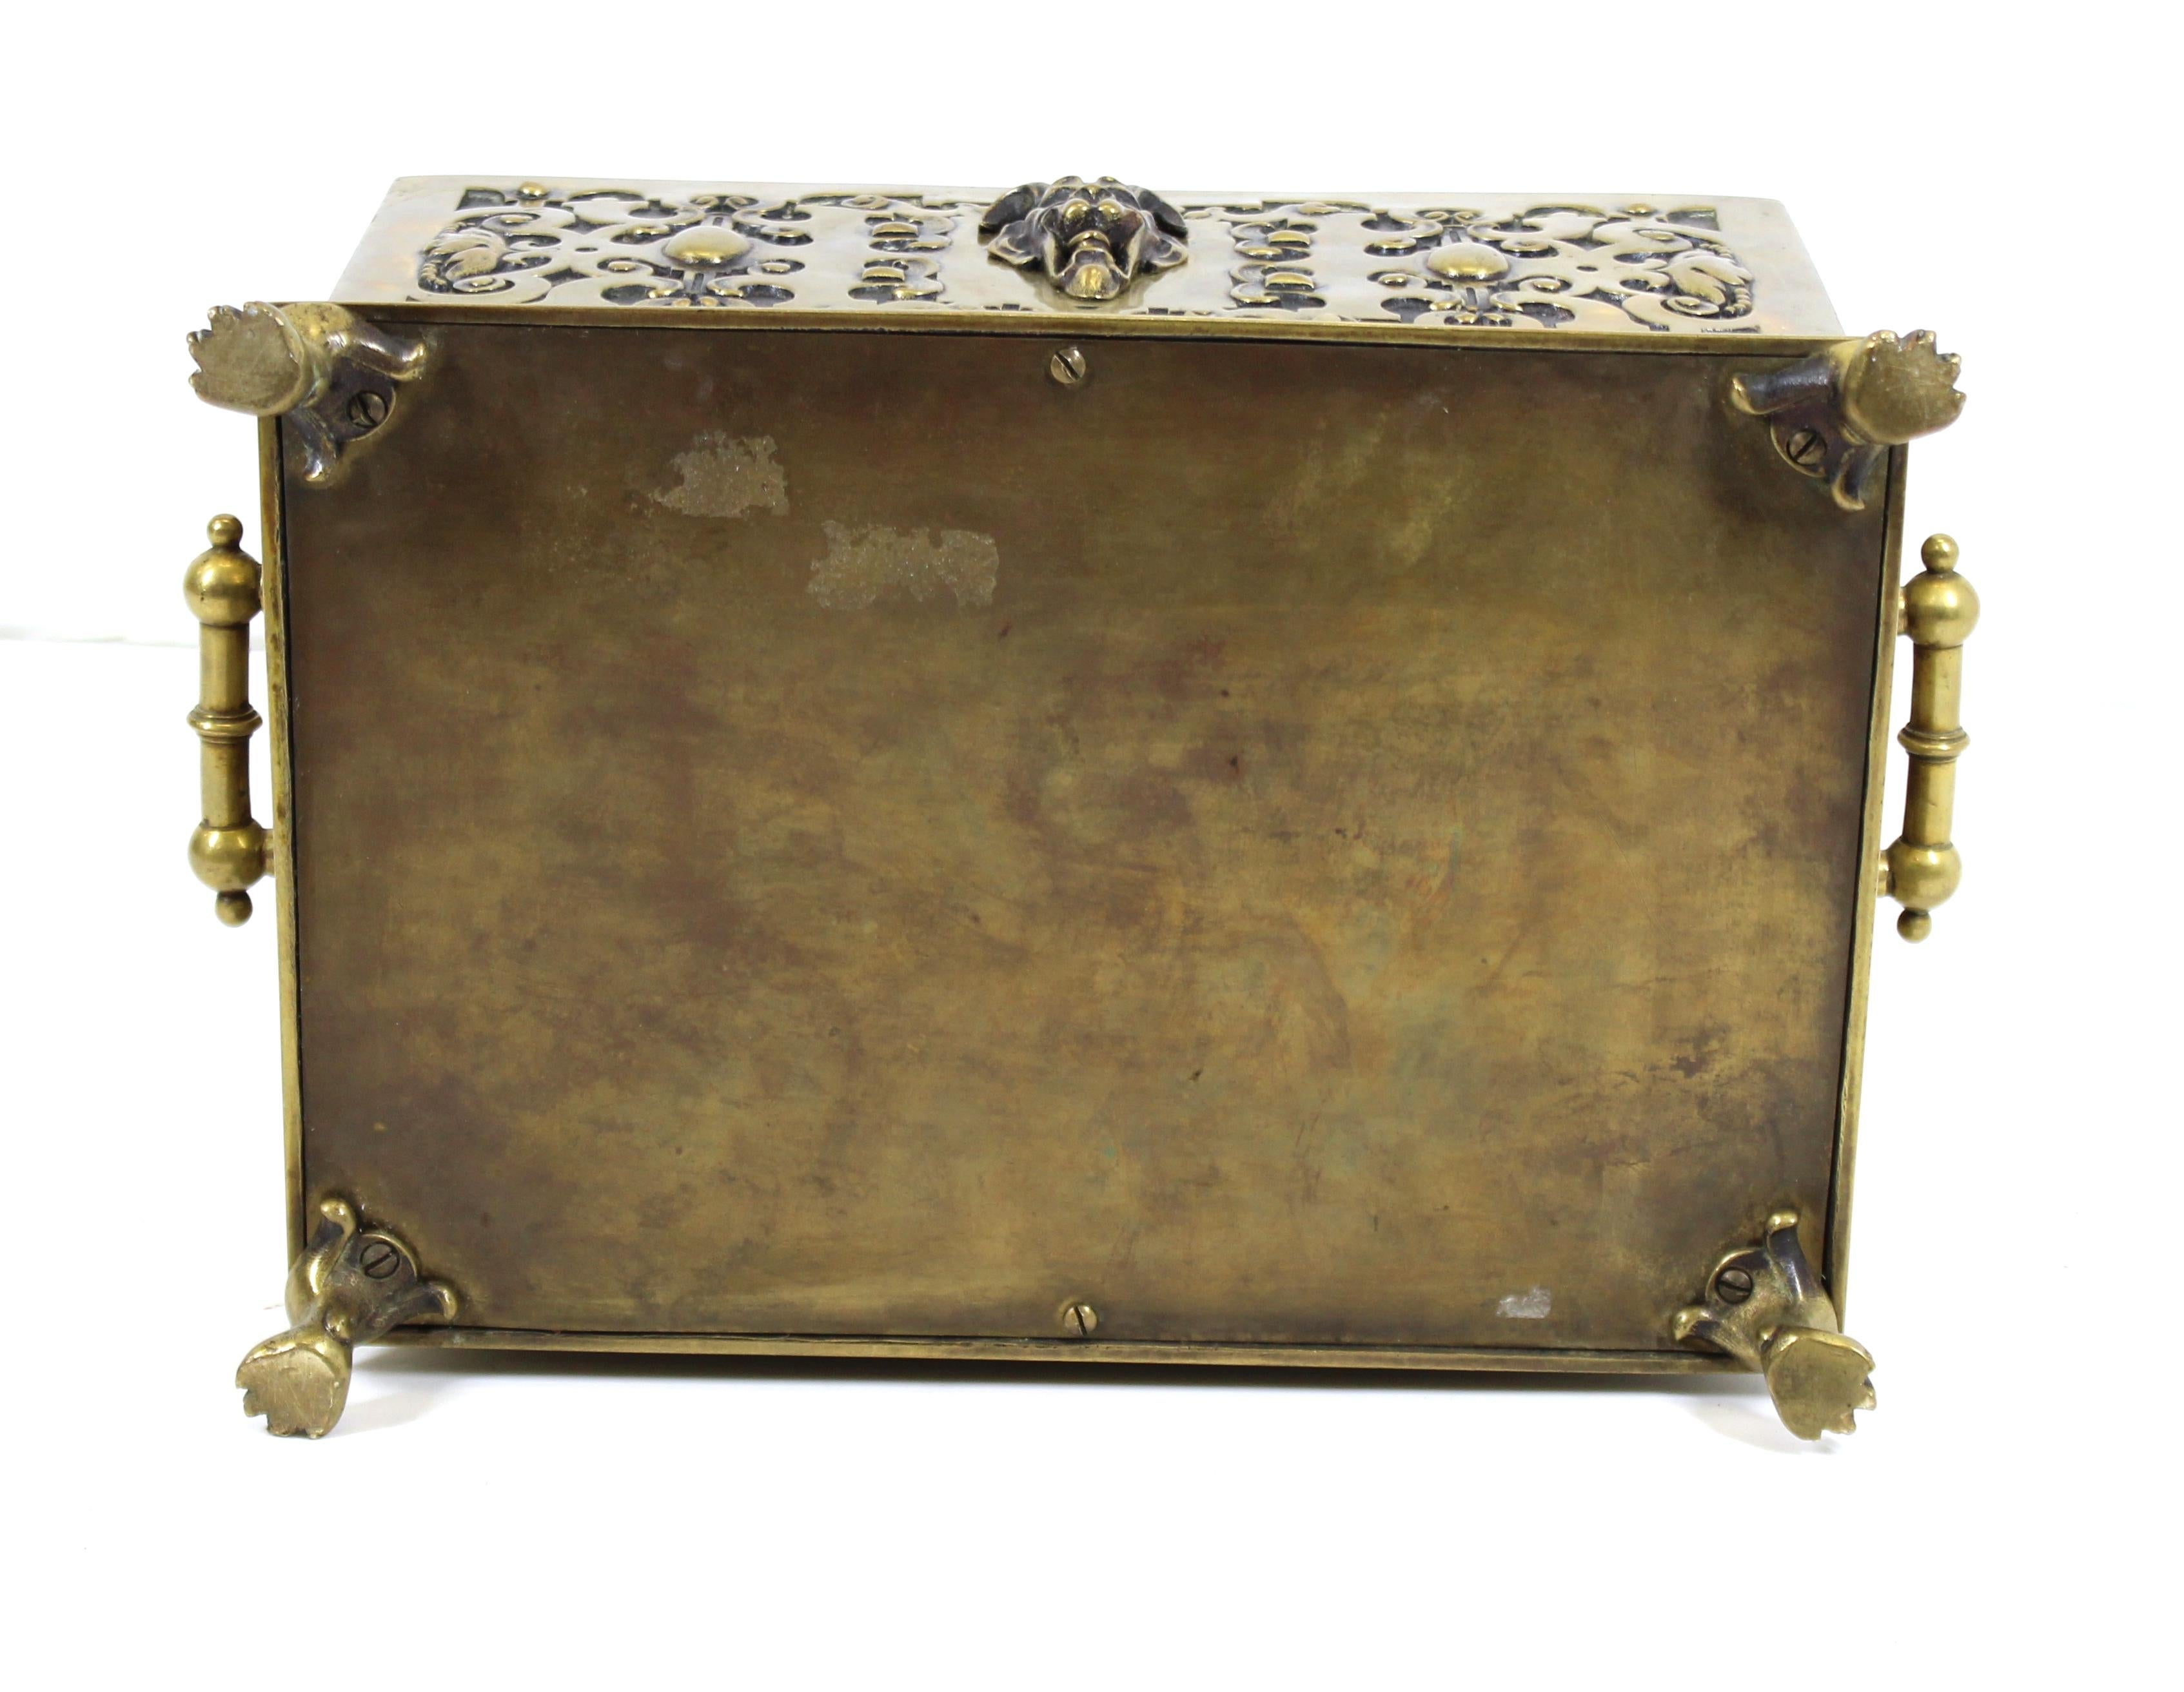 American Aesthetic Movement Ornate Cast Bronze Casket Humidor Box with Grotesque 3